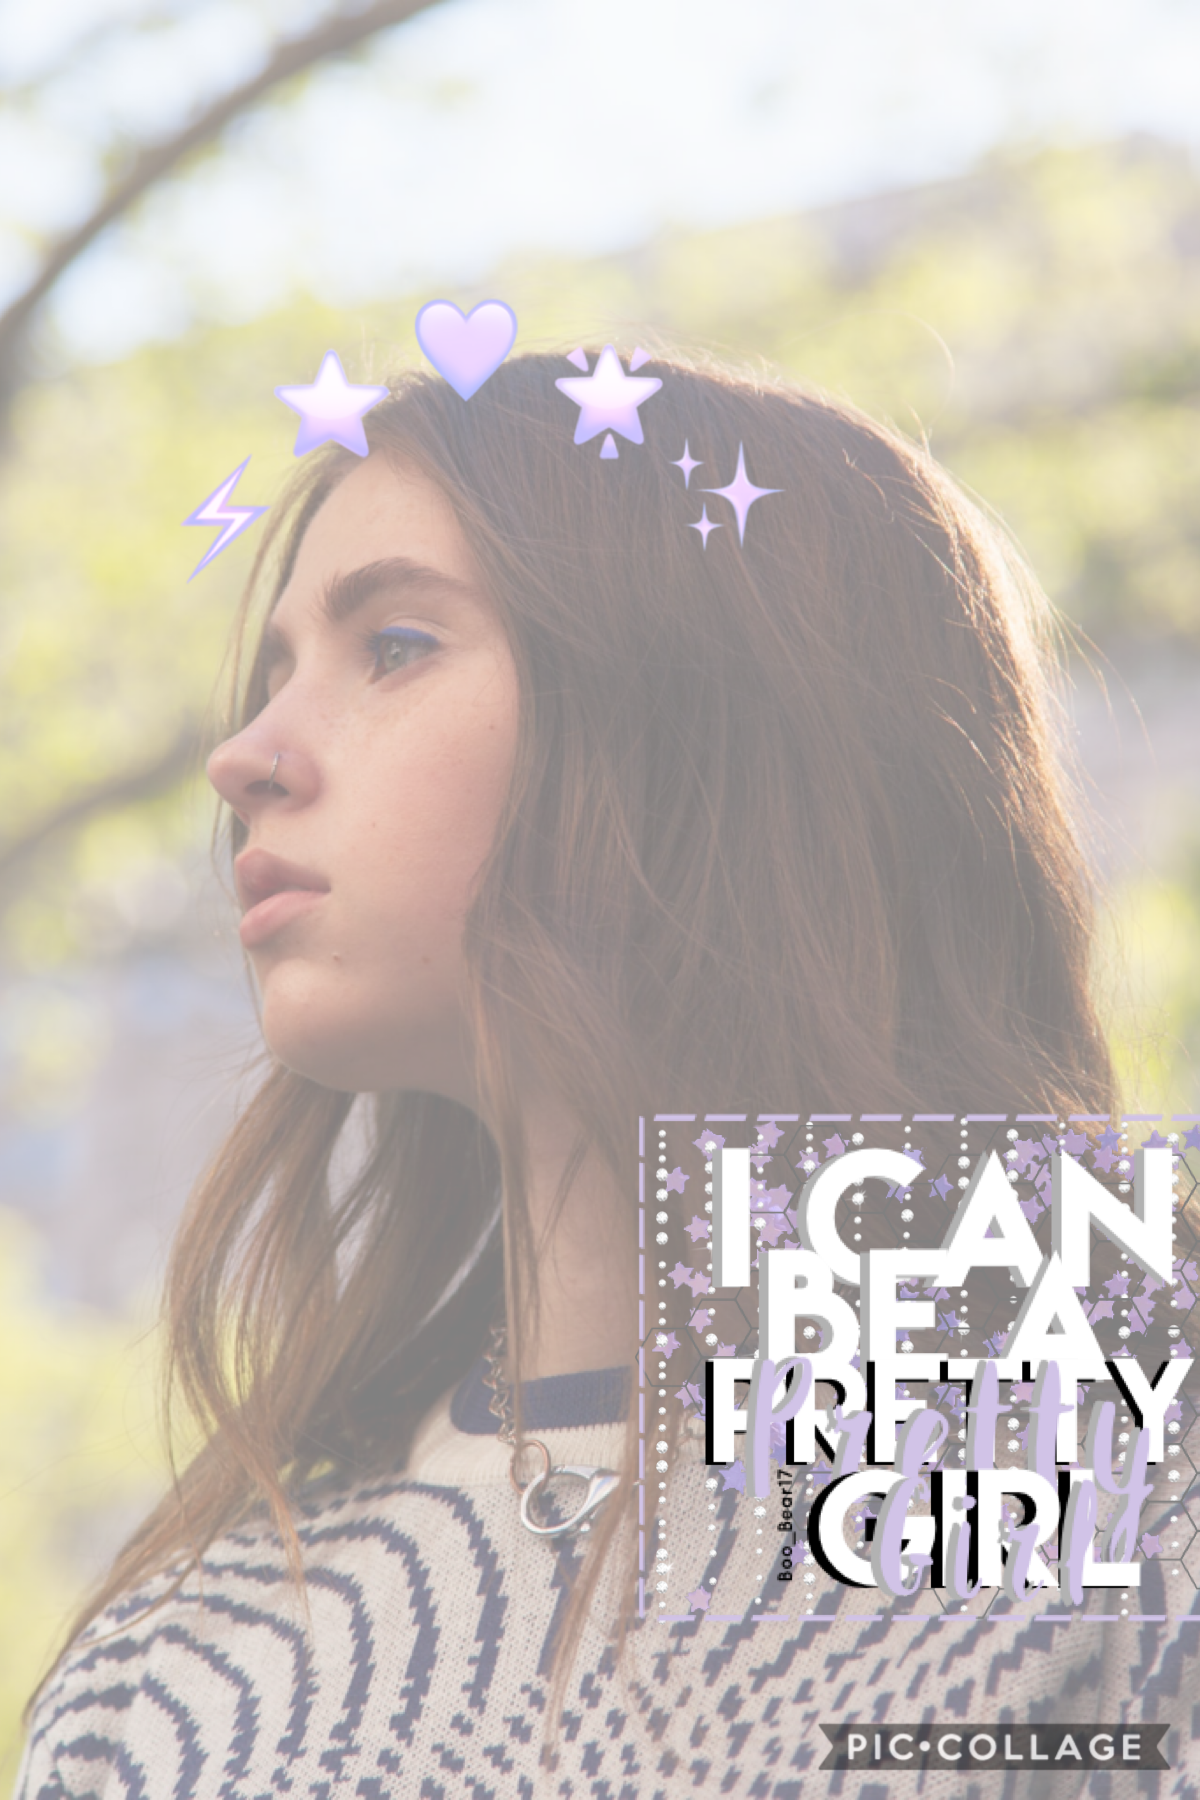 💜I can be a pretty girl💜
•Clairo is one of my new favorite artists, hence this edit
•also I’ve been praying for Posty lately, he doesn’t seem alright and it sucks to see that
•song rec: Addicted by Saving Abel